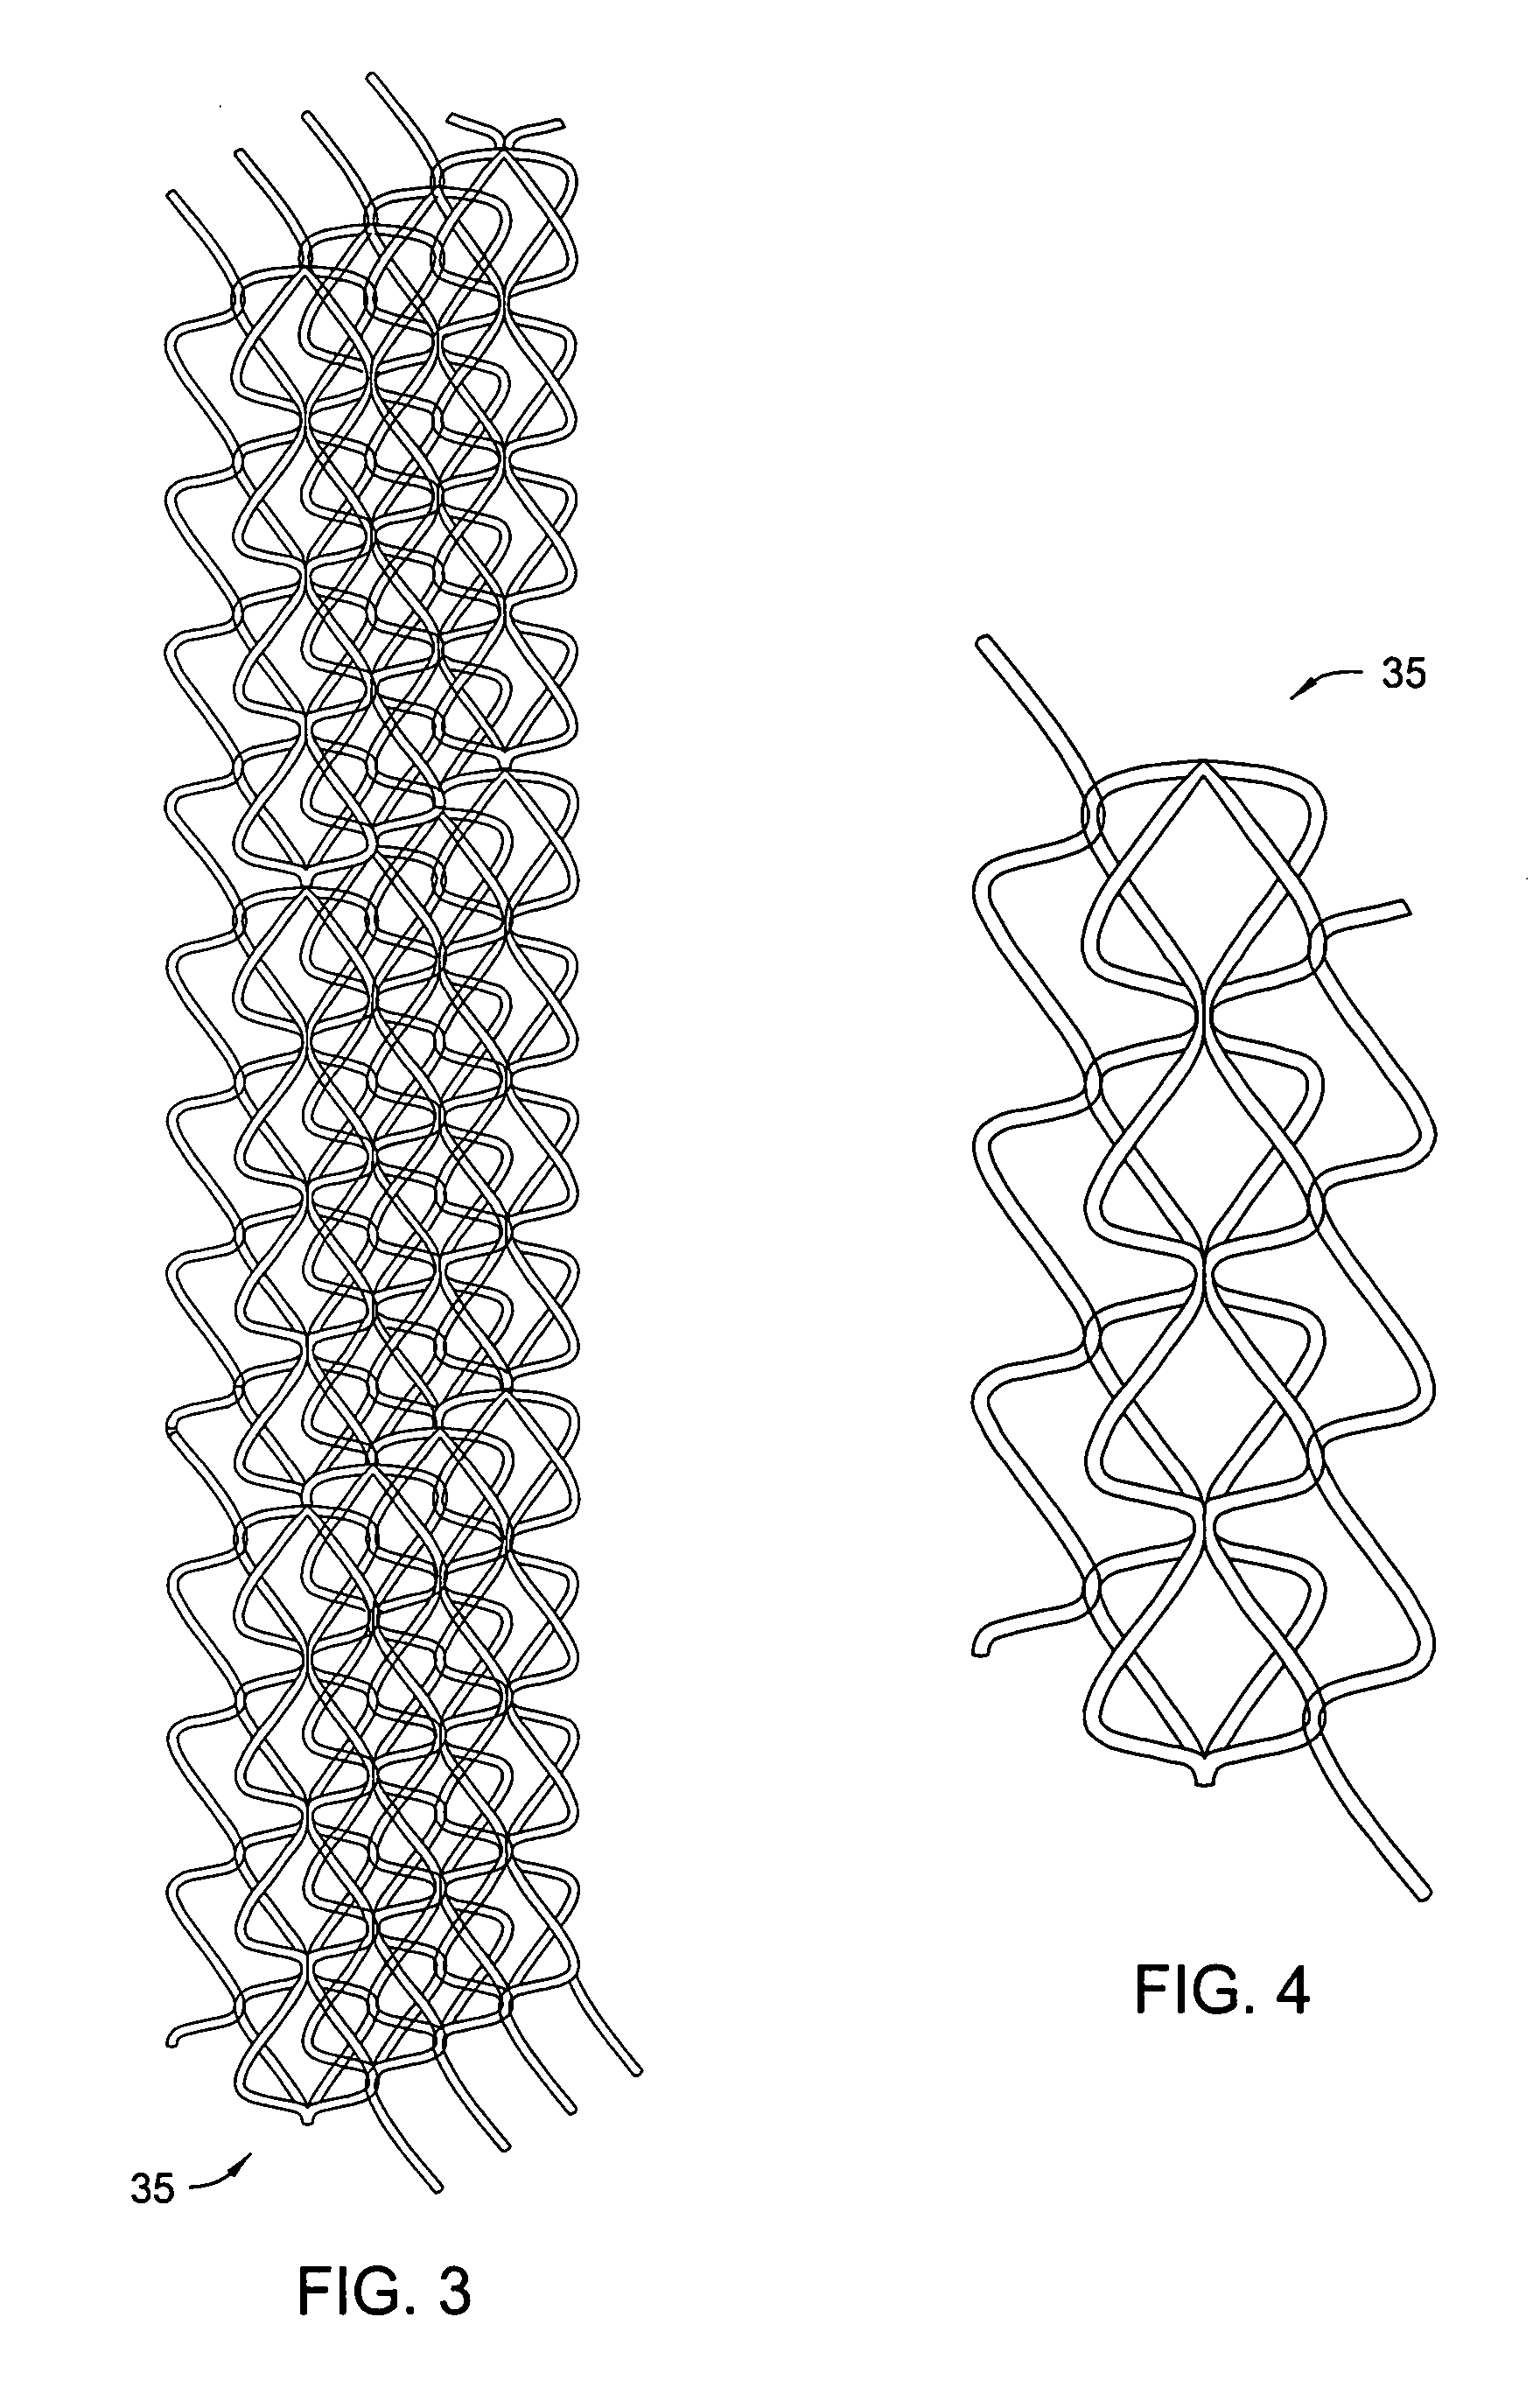 System, method, apparatus, and applications for open cell woven structural supports